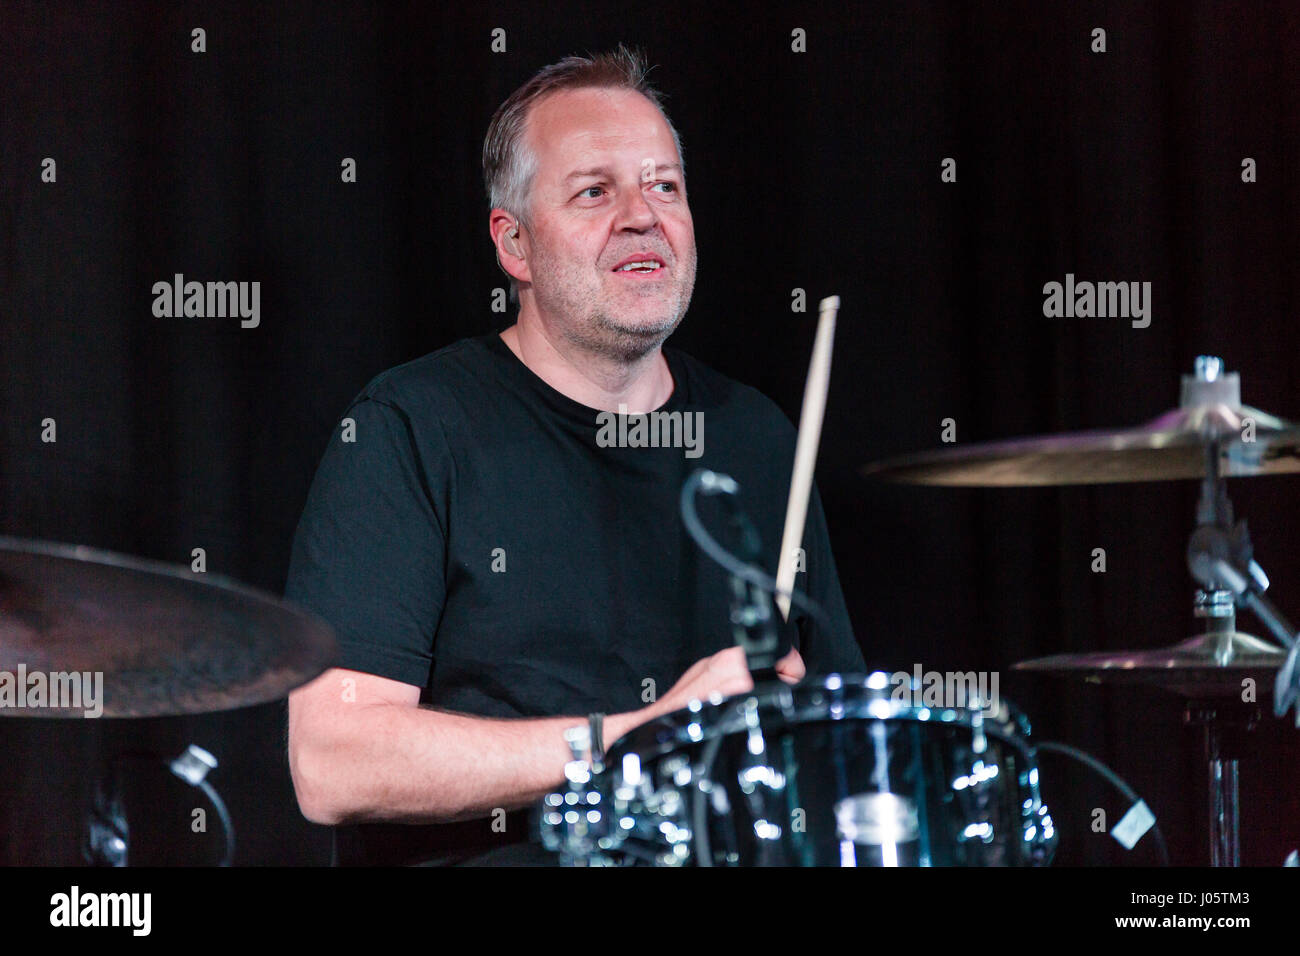 Frankfurt/Main, Germany. 5th April, 2017. Yamaha All-Stars Band performs at exhibition area of Yamaha Music Europe GmbH. The Band is a collaboration of popular german Jazz and Pop musicians. Here: Wolfgang Haffner (drums), jazz drummer. Fotocredit: Christian Lademann Stock Photo